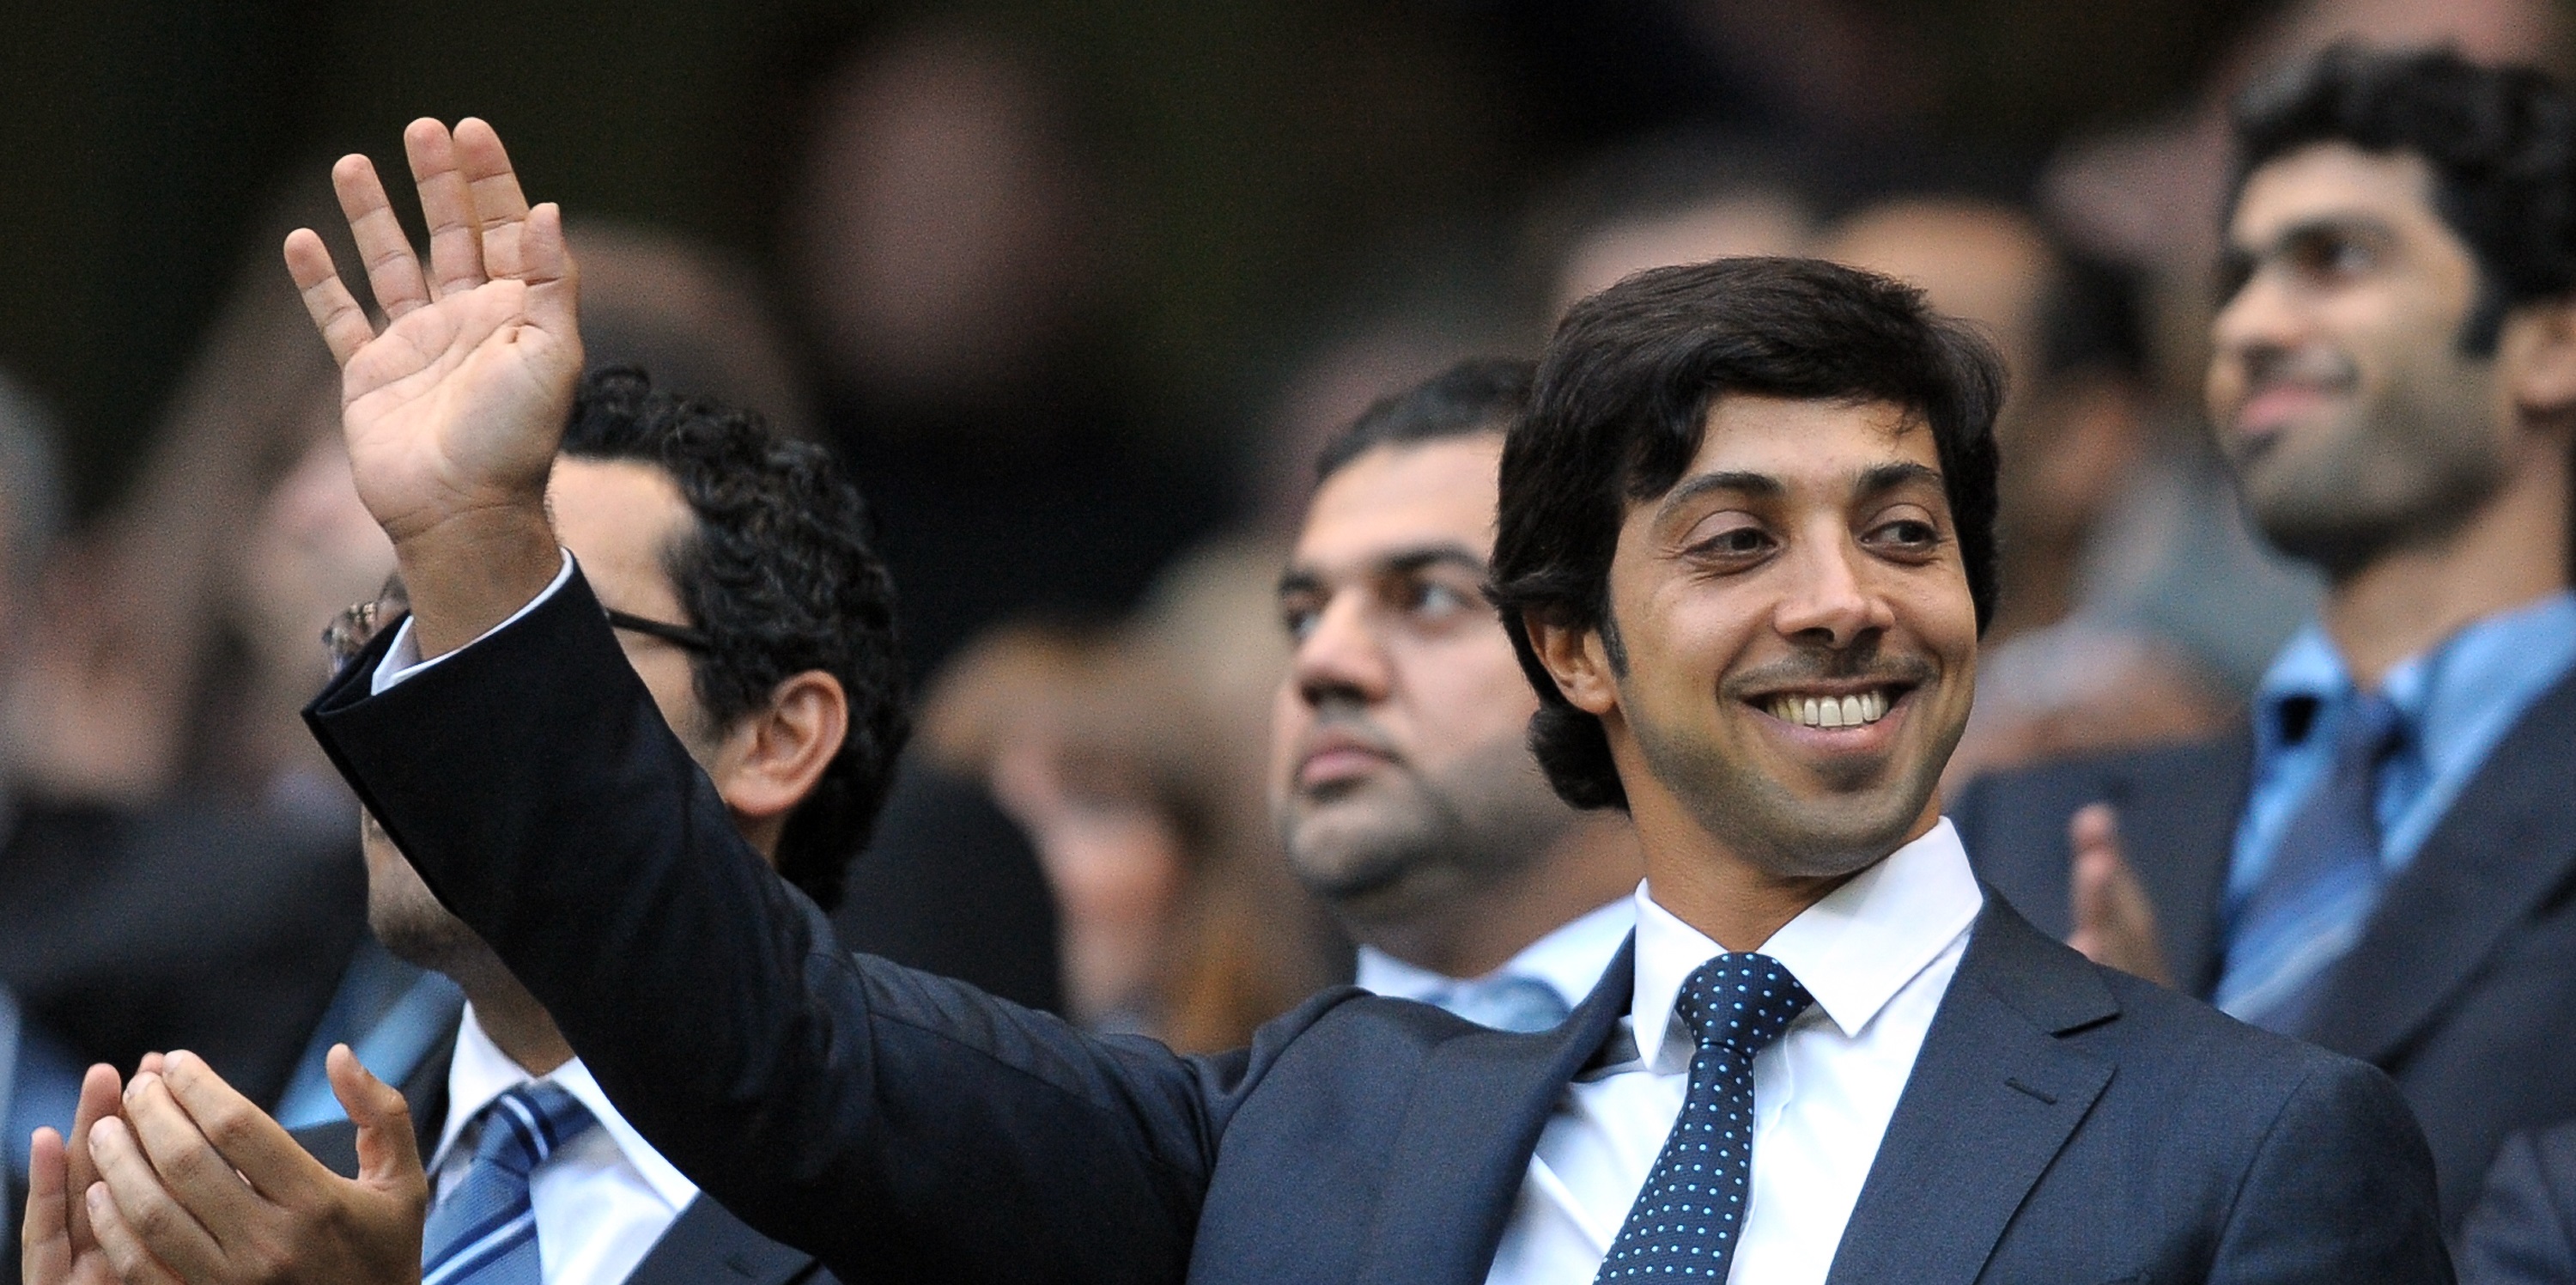 Manchester City’s troubling dealings exposed in new report; including pressuring of underage stars & disguised sponsorship from Sheikh Mansour